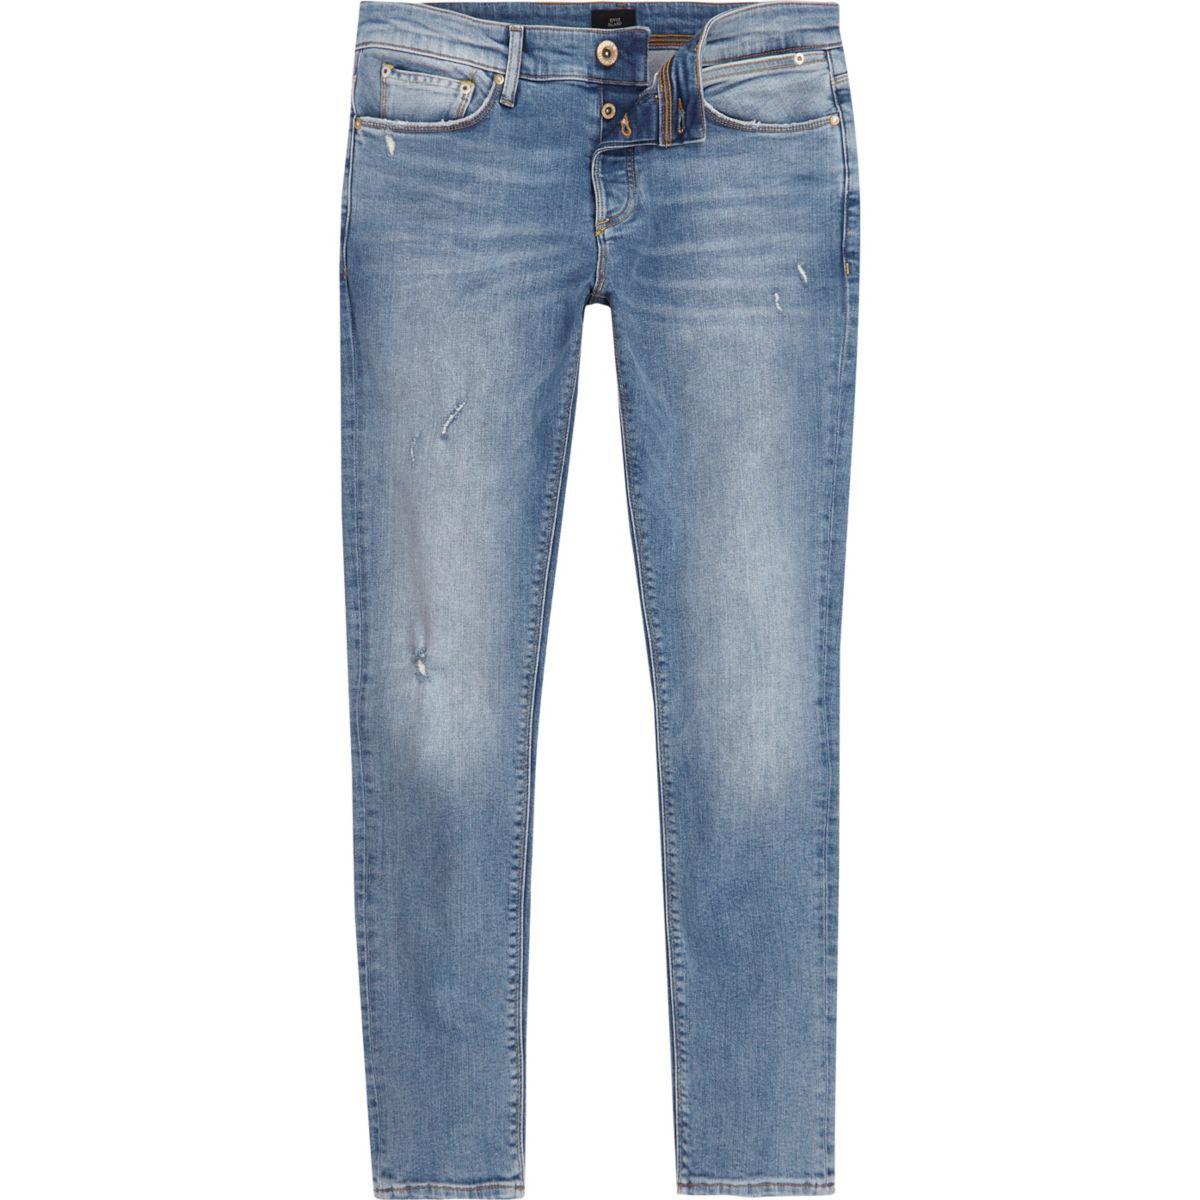 Lyst - River island Light Blue Sid Distressed Skinny Jeans in Blue for Men